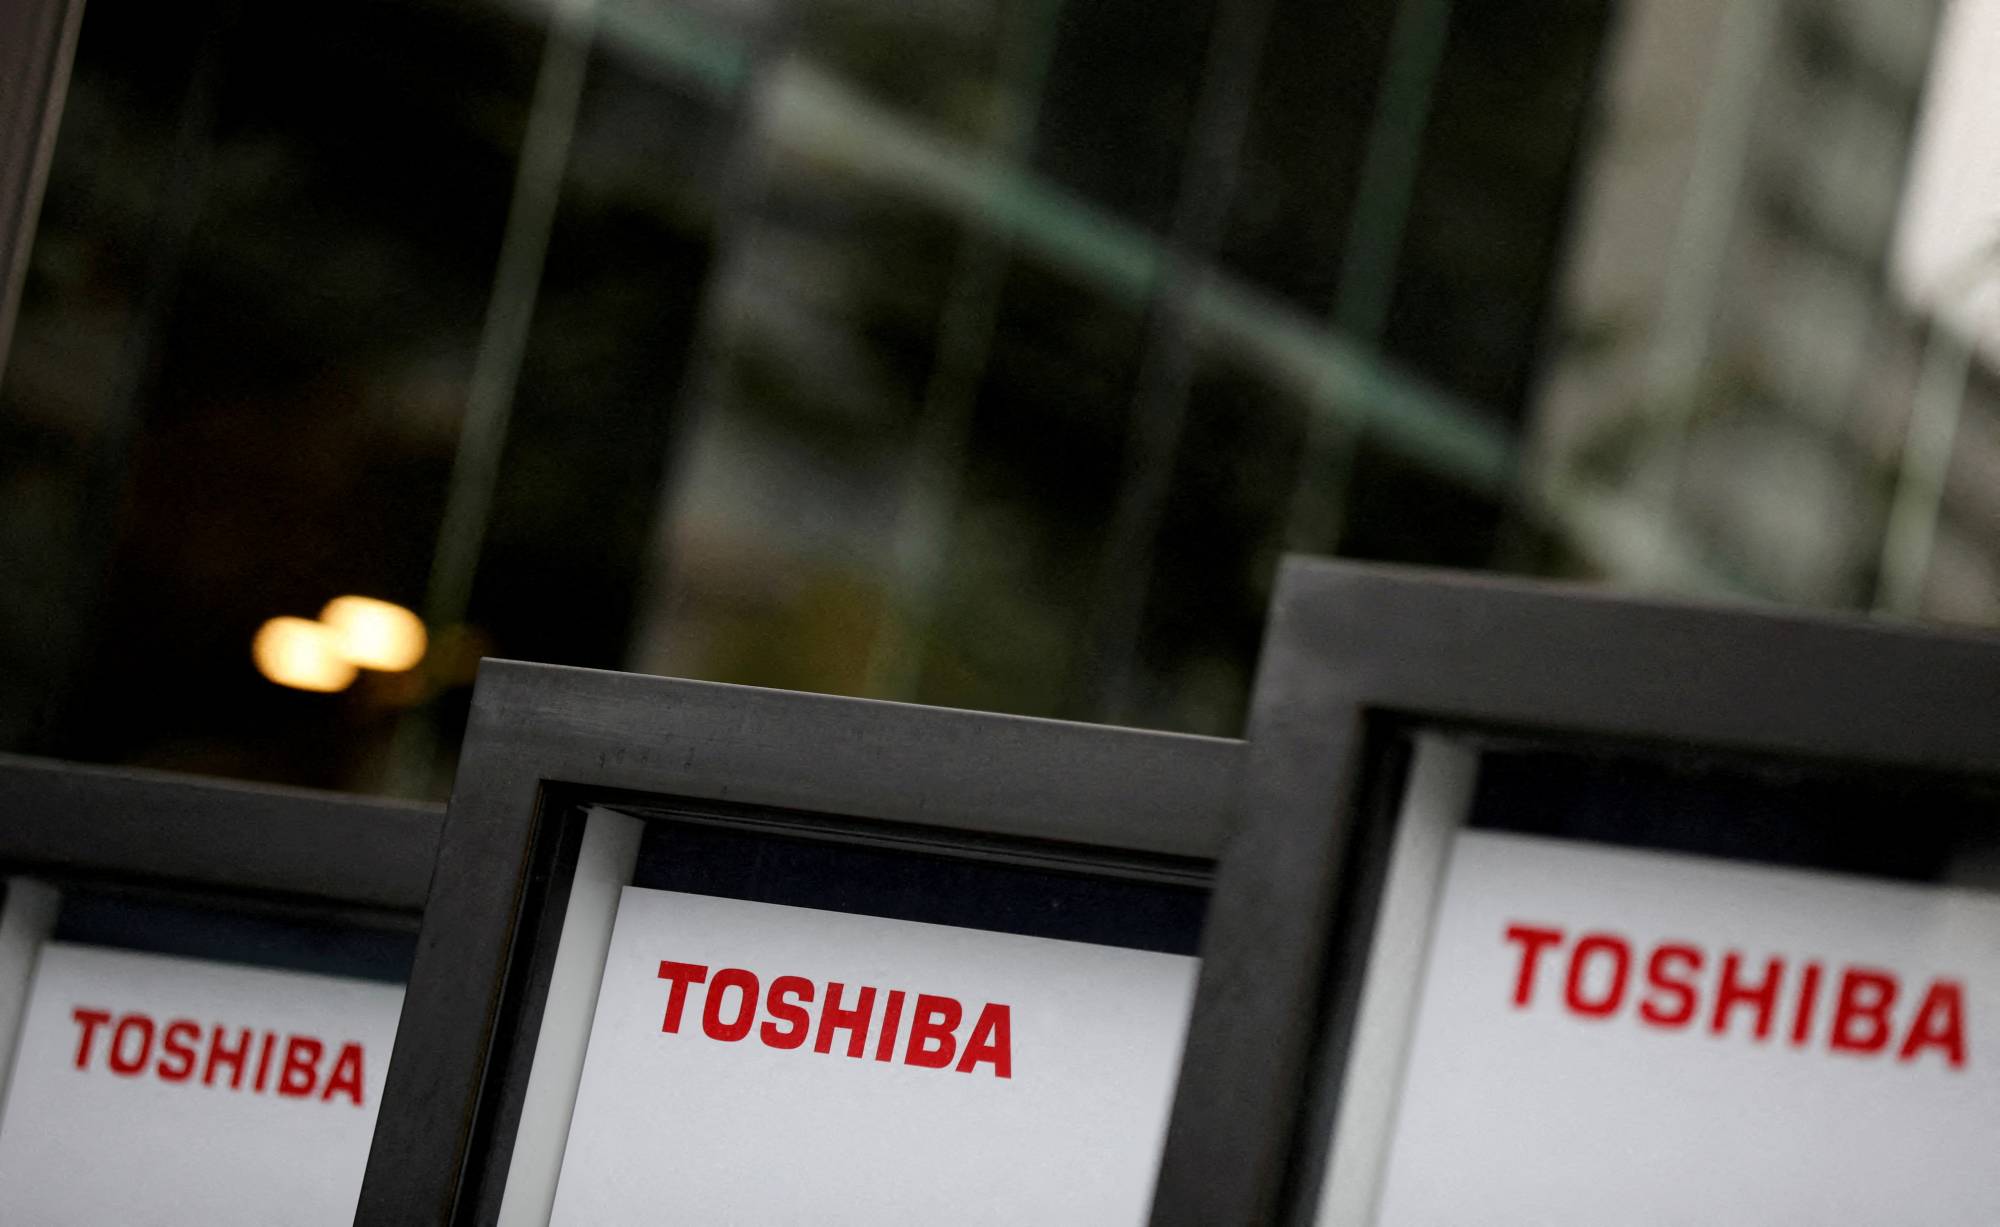 Toshiba's largest shareholder Effissimo Capital Management Pte Ltd. indicated it would sell Toshiba shares it holds to Bain Capital if it launched a takeover bid for the Japanese firm. | REUTERS